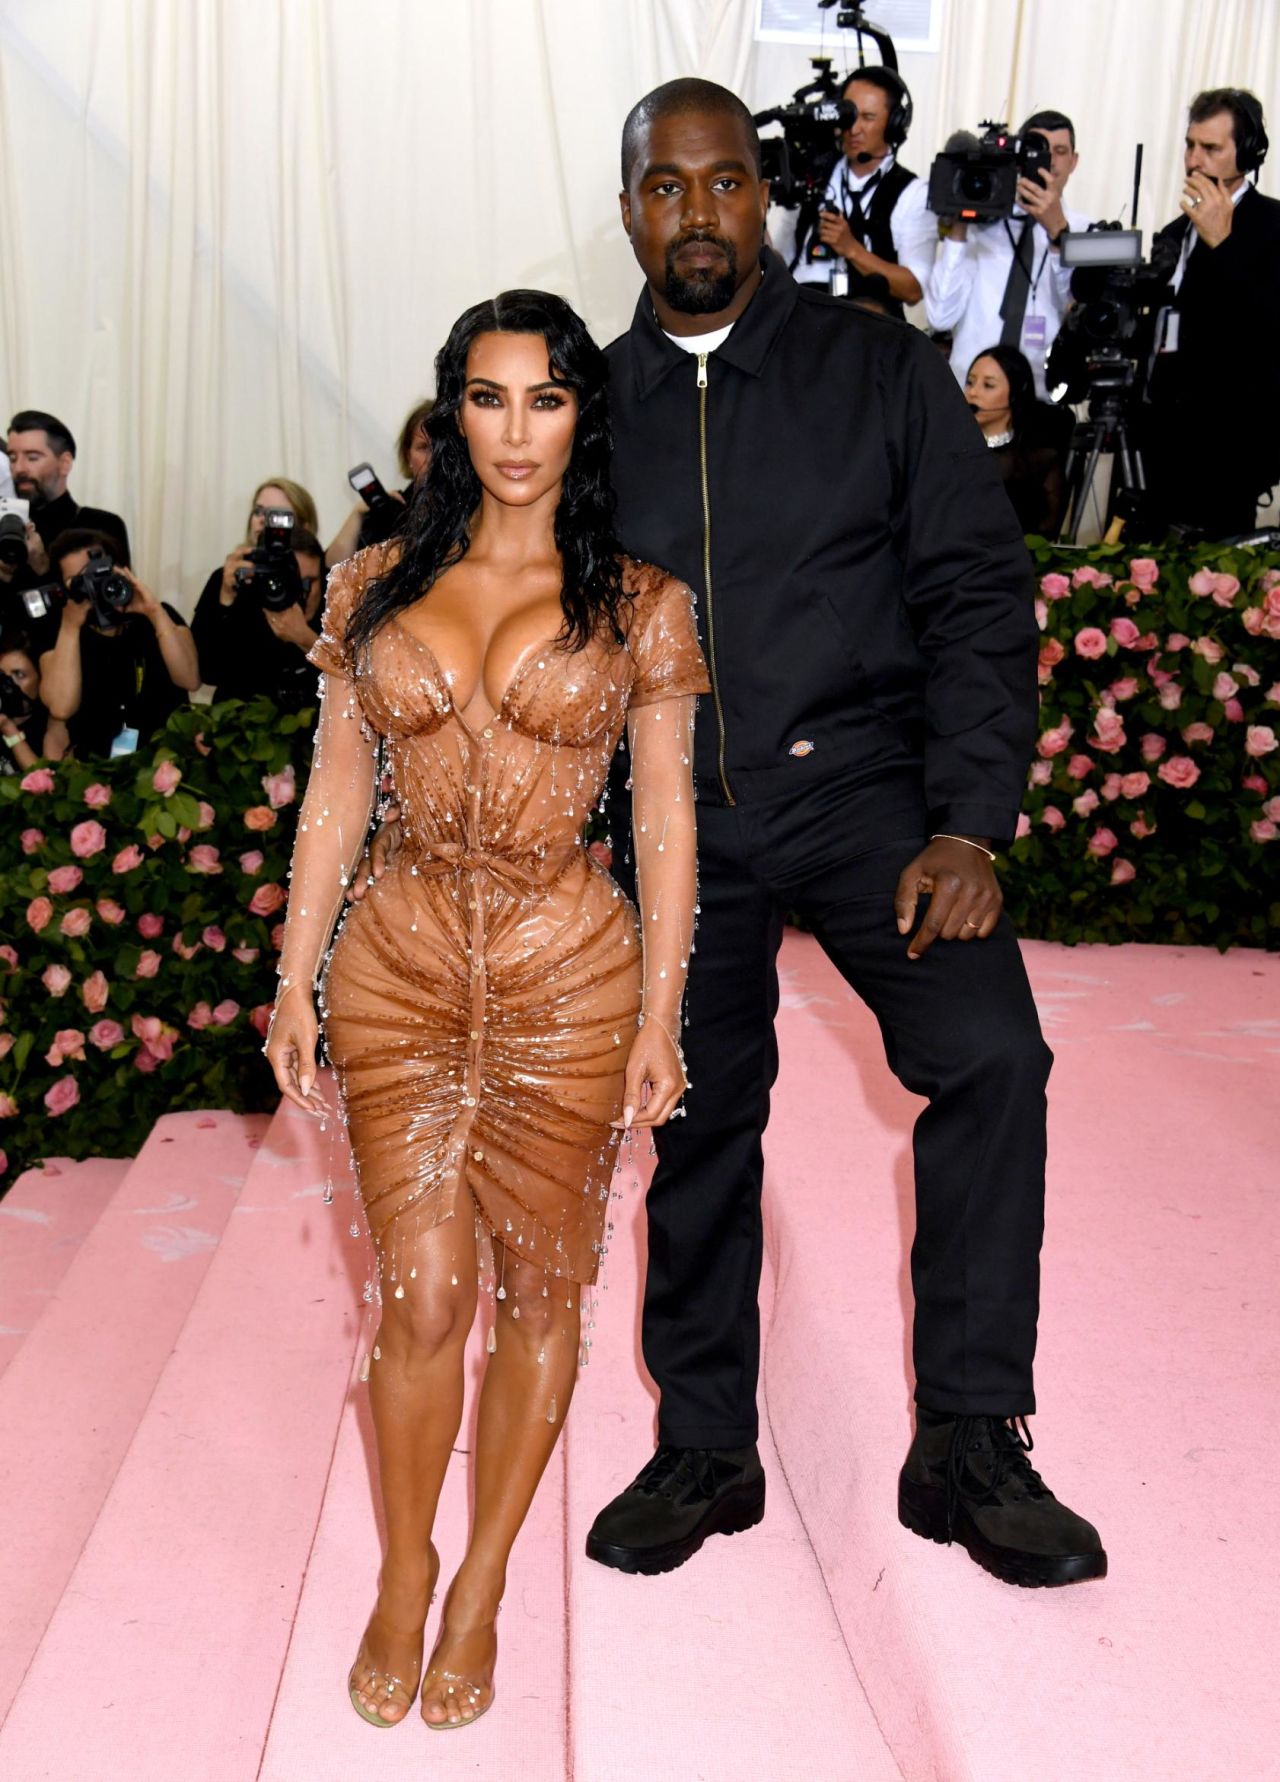 Kim Kardashian and Kanye West attend the Metropolitan Museum of Art Costume Institute Benefit Gala 2019 in New York.